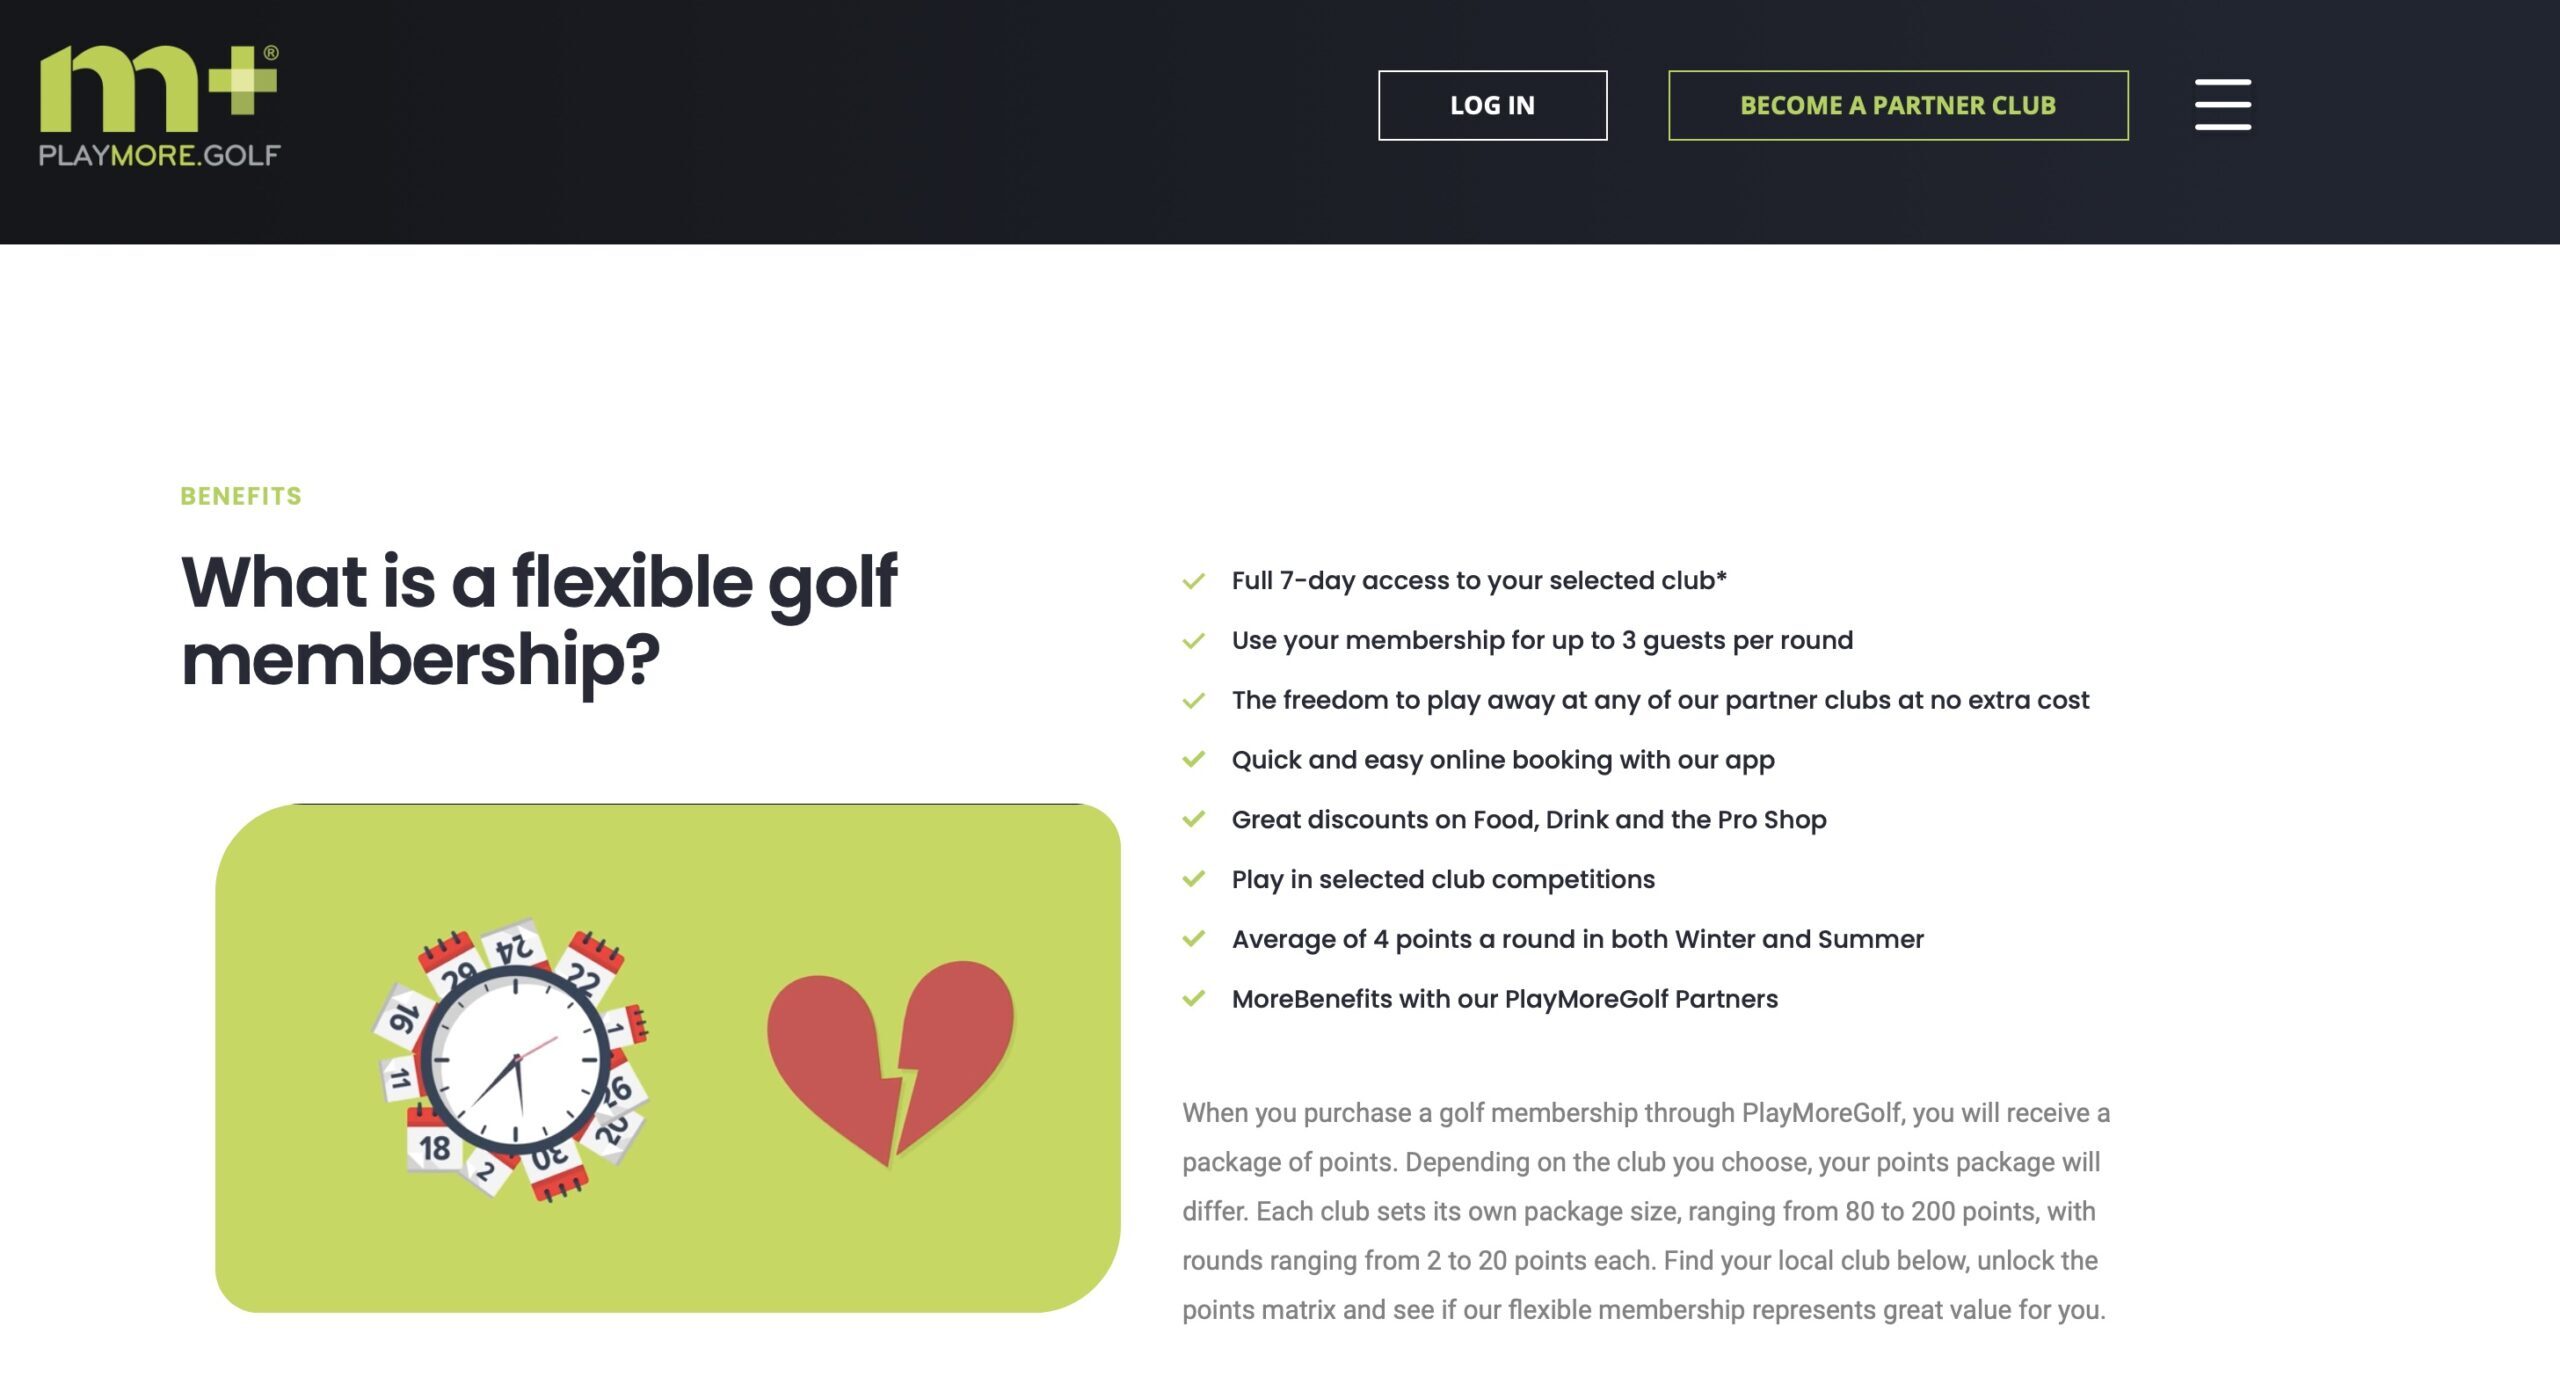 PlayMoreGolf has opened up golf membership to thousands of players